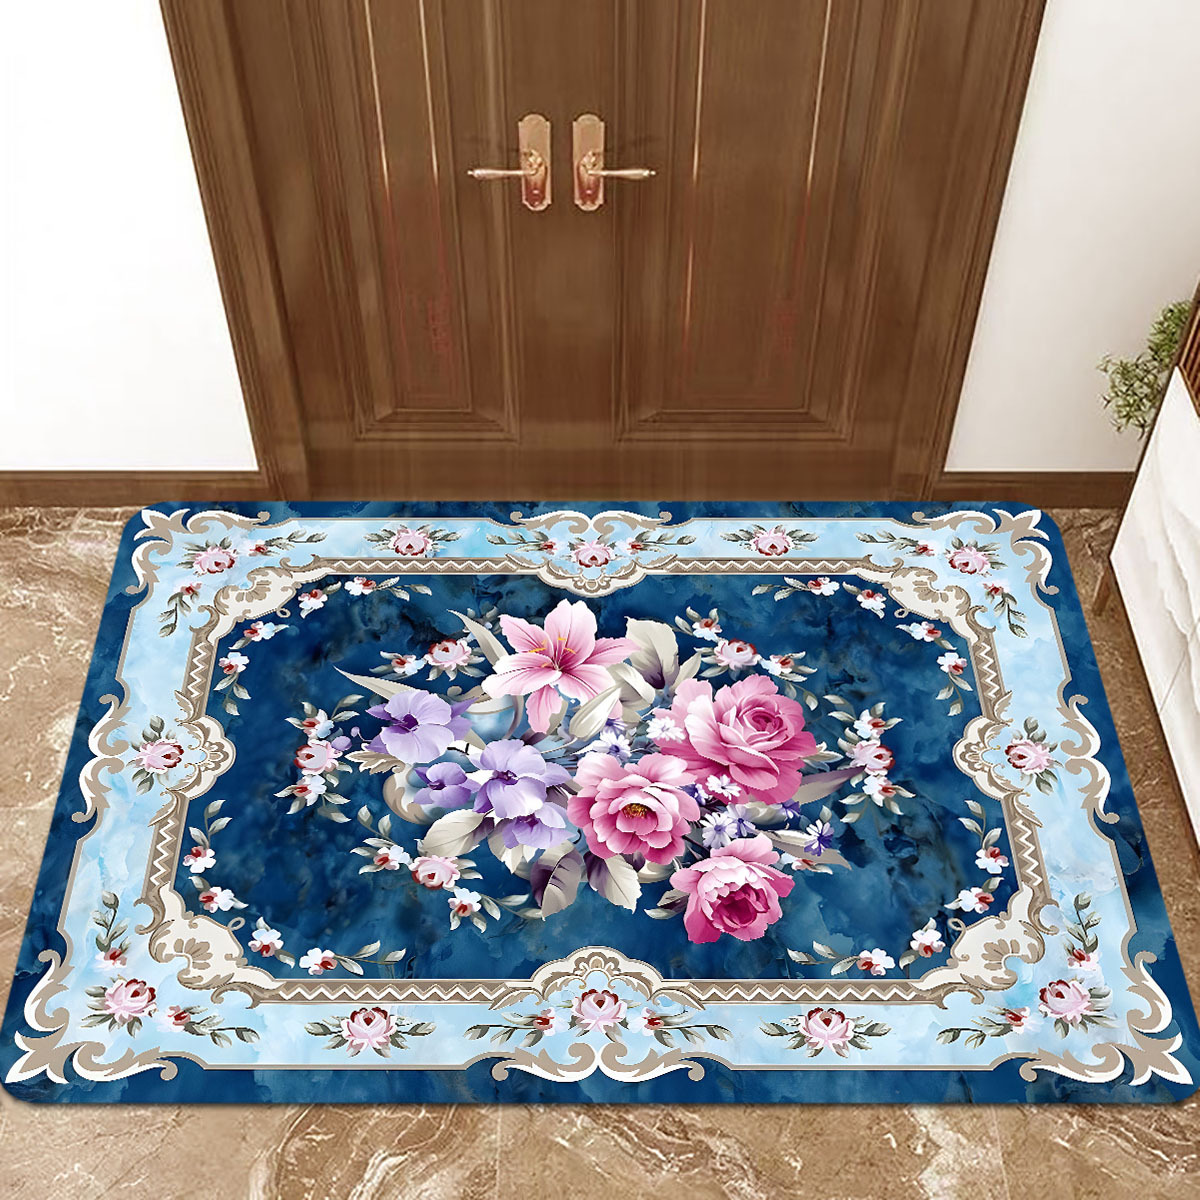 

Vintage Floral Bohemian Entrance Mat - Soft, Non-slip, Stain-resistant Polyester Rug With Sponge Backing For Indoor/outdoor Use - Quick Dry, Perfect For Kitchen & Home Decor